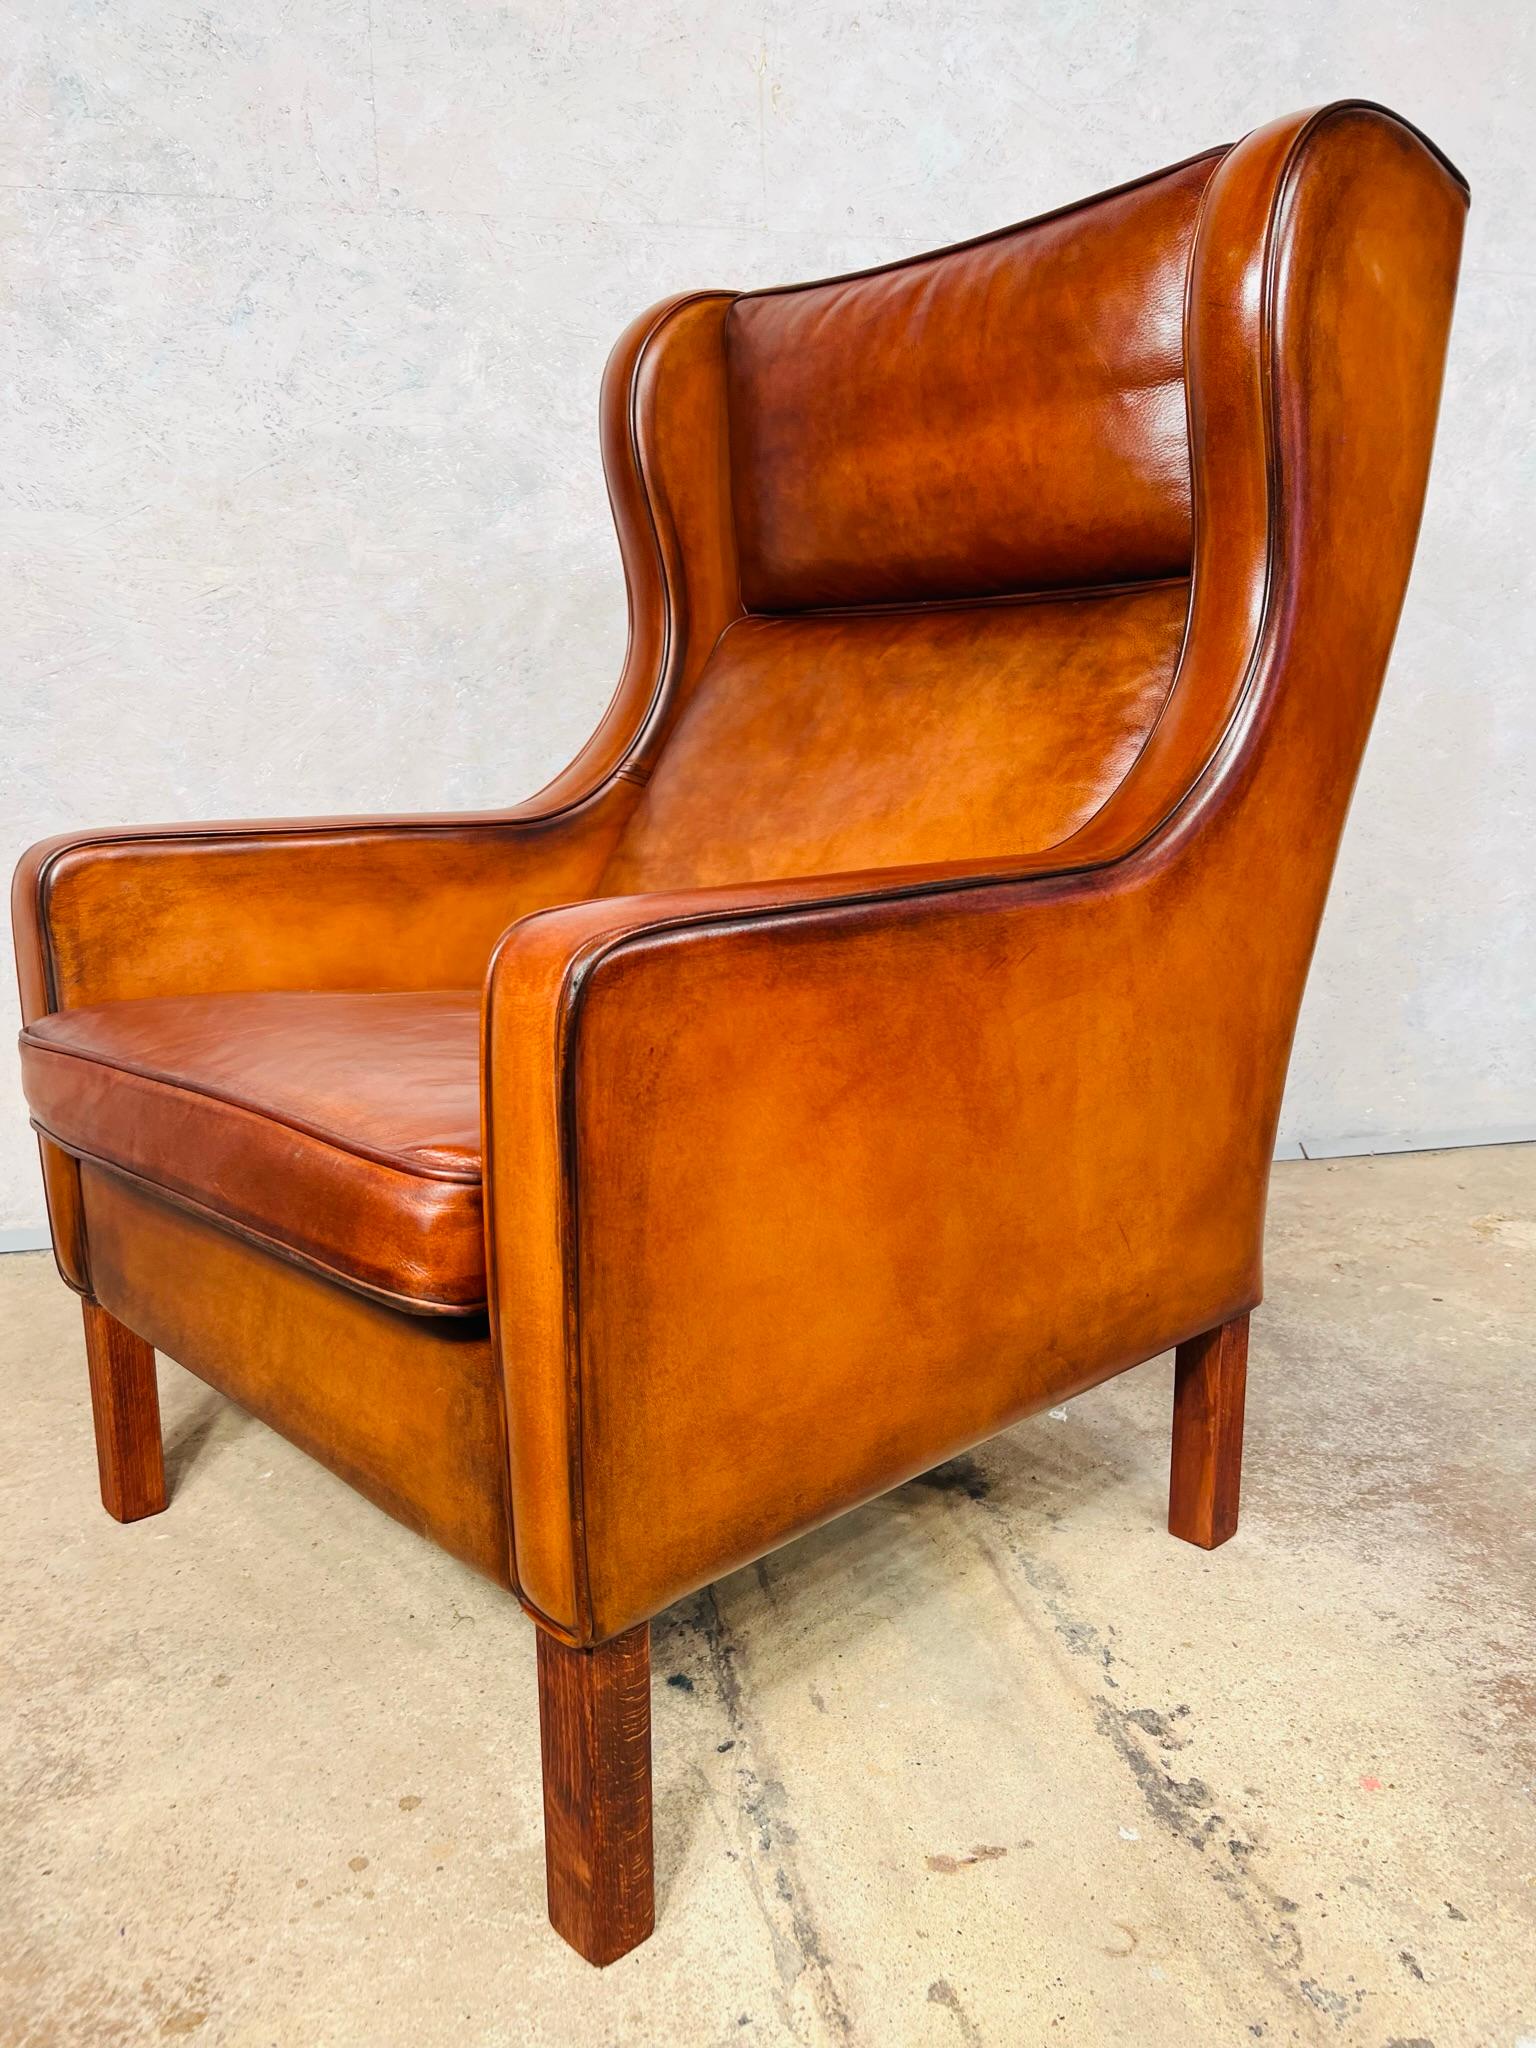 A beautiful Vintage Danish 70s Wingback Armchair, great quality chair, with a beautiful shape and proportions. Sits beautifully. In great condition with a great patinated tan colour the leather is great quality and has a beautiful finish and